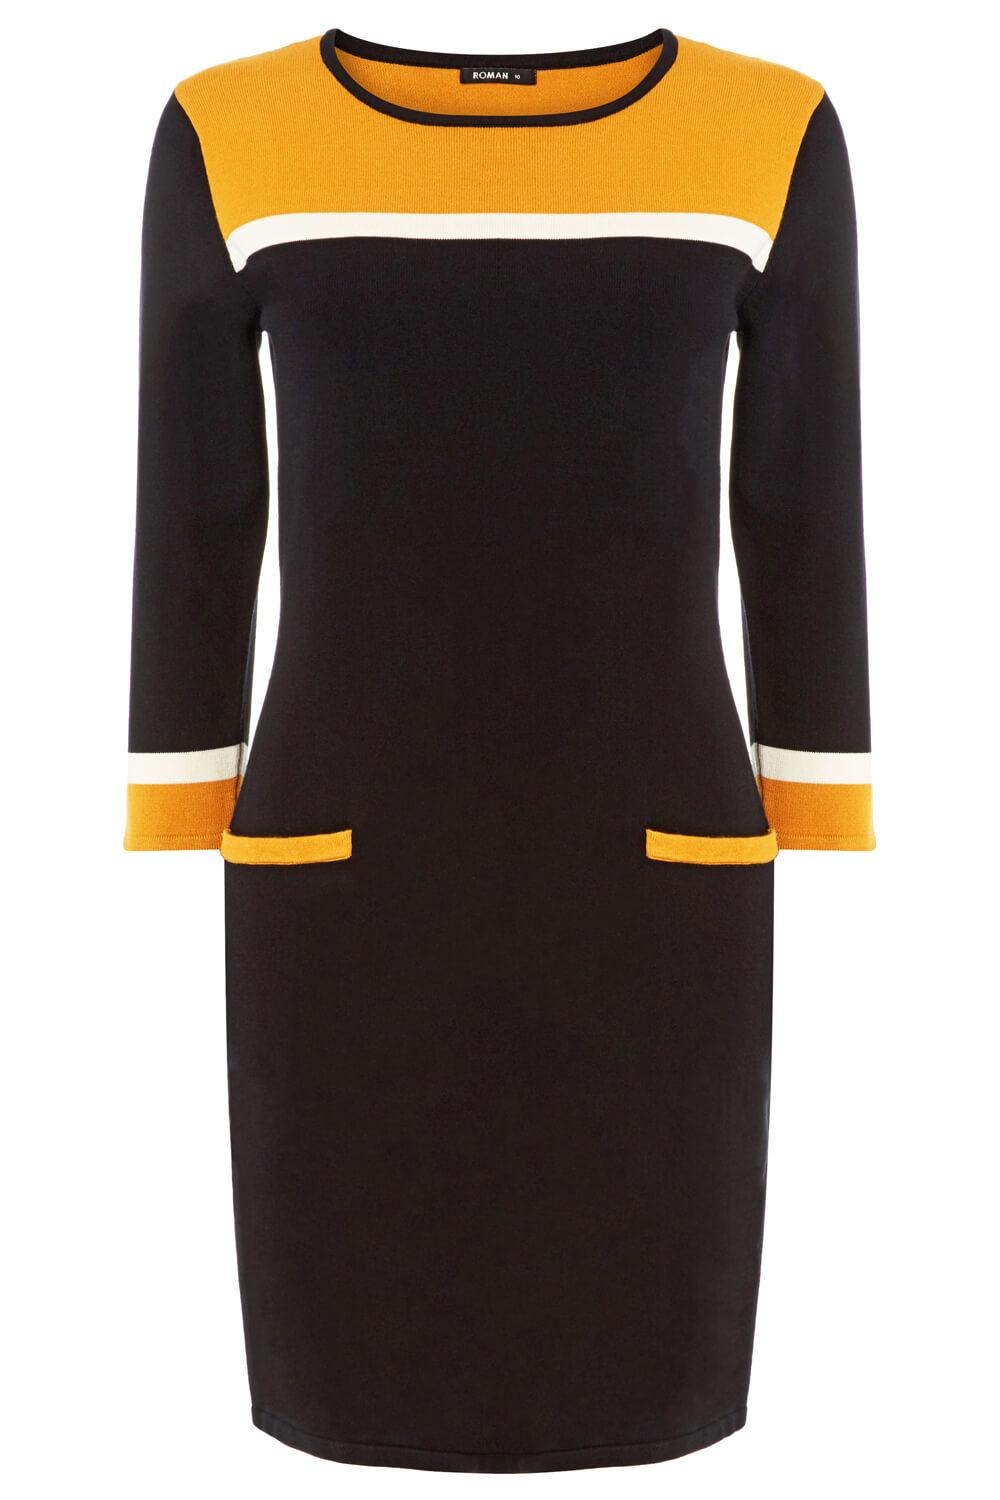 Amber Colour Block Knitted Dress, Image 5 of 5